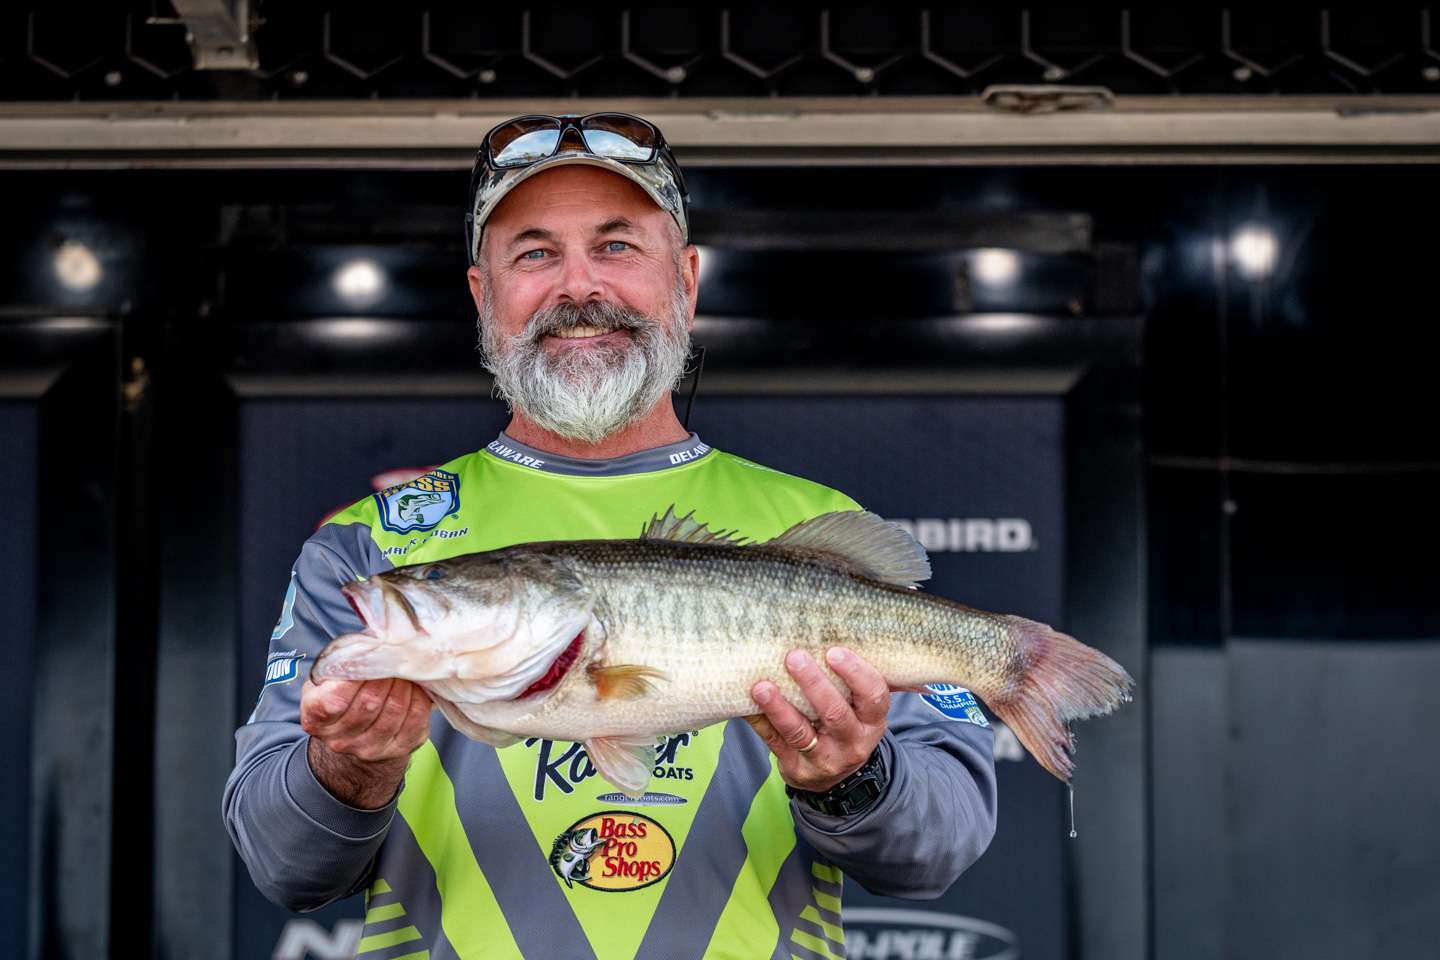 See how the Team anglers fared on Day 2 of the 2021 Bassmaster Team Championship at Lake Eufaula! <br><br> Mark Hogan - Brian La Clair (13th, 22-0) 